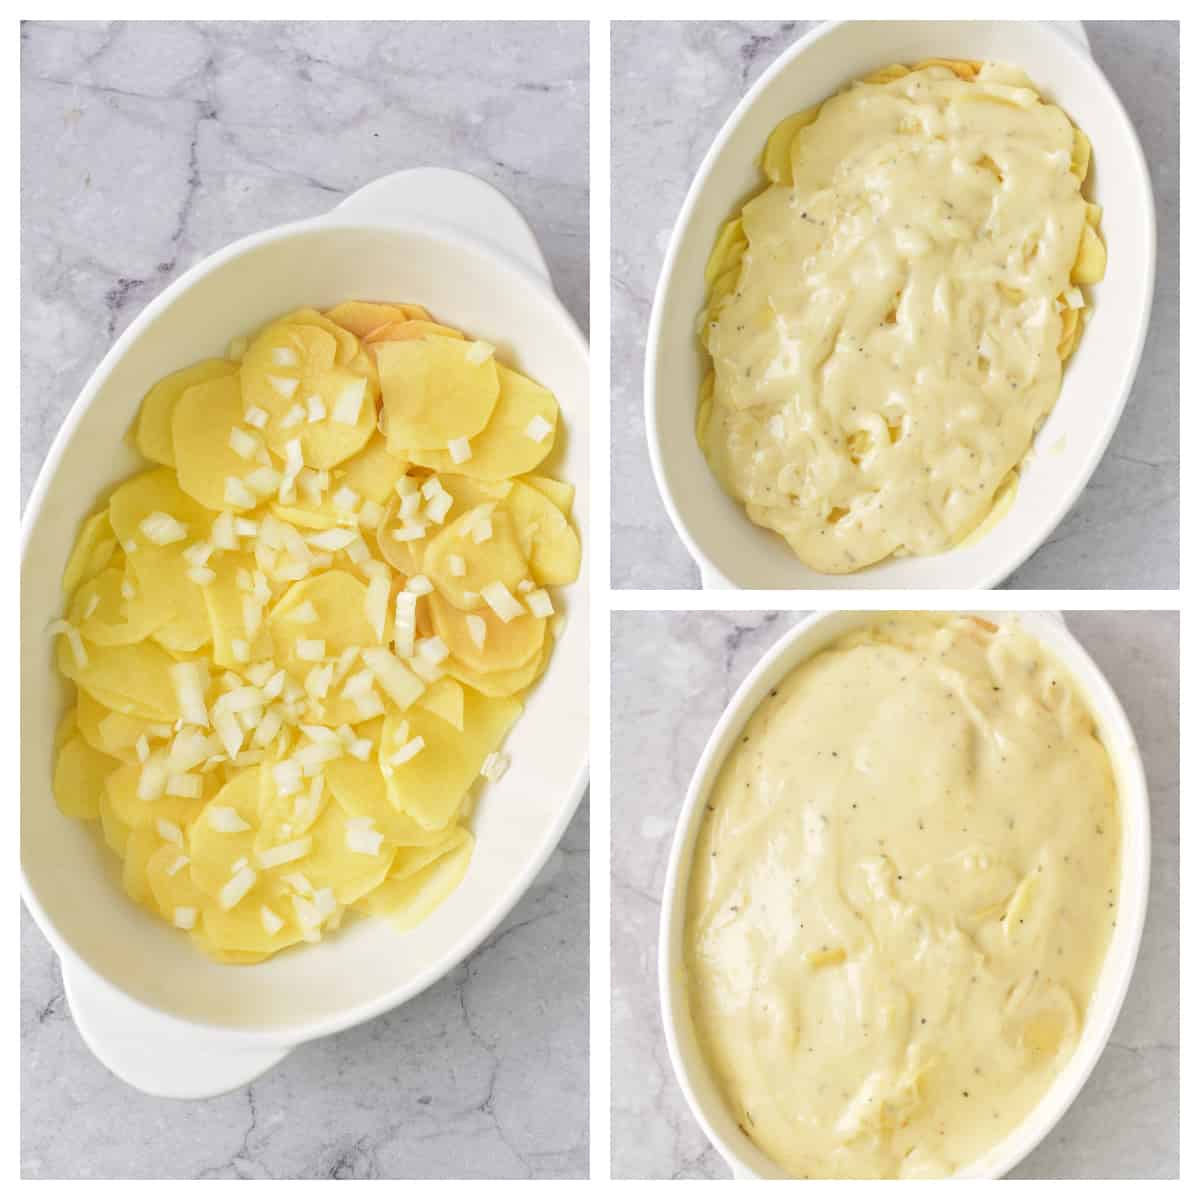 Stages of layering sliced potatoes and cheese sauce.